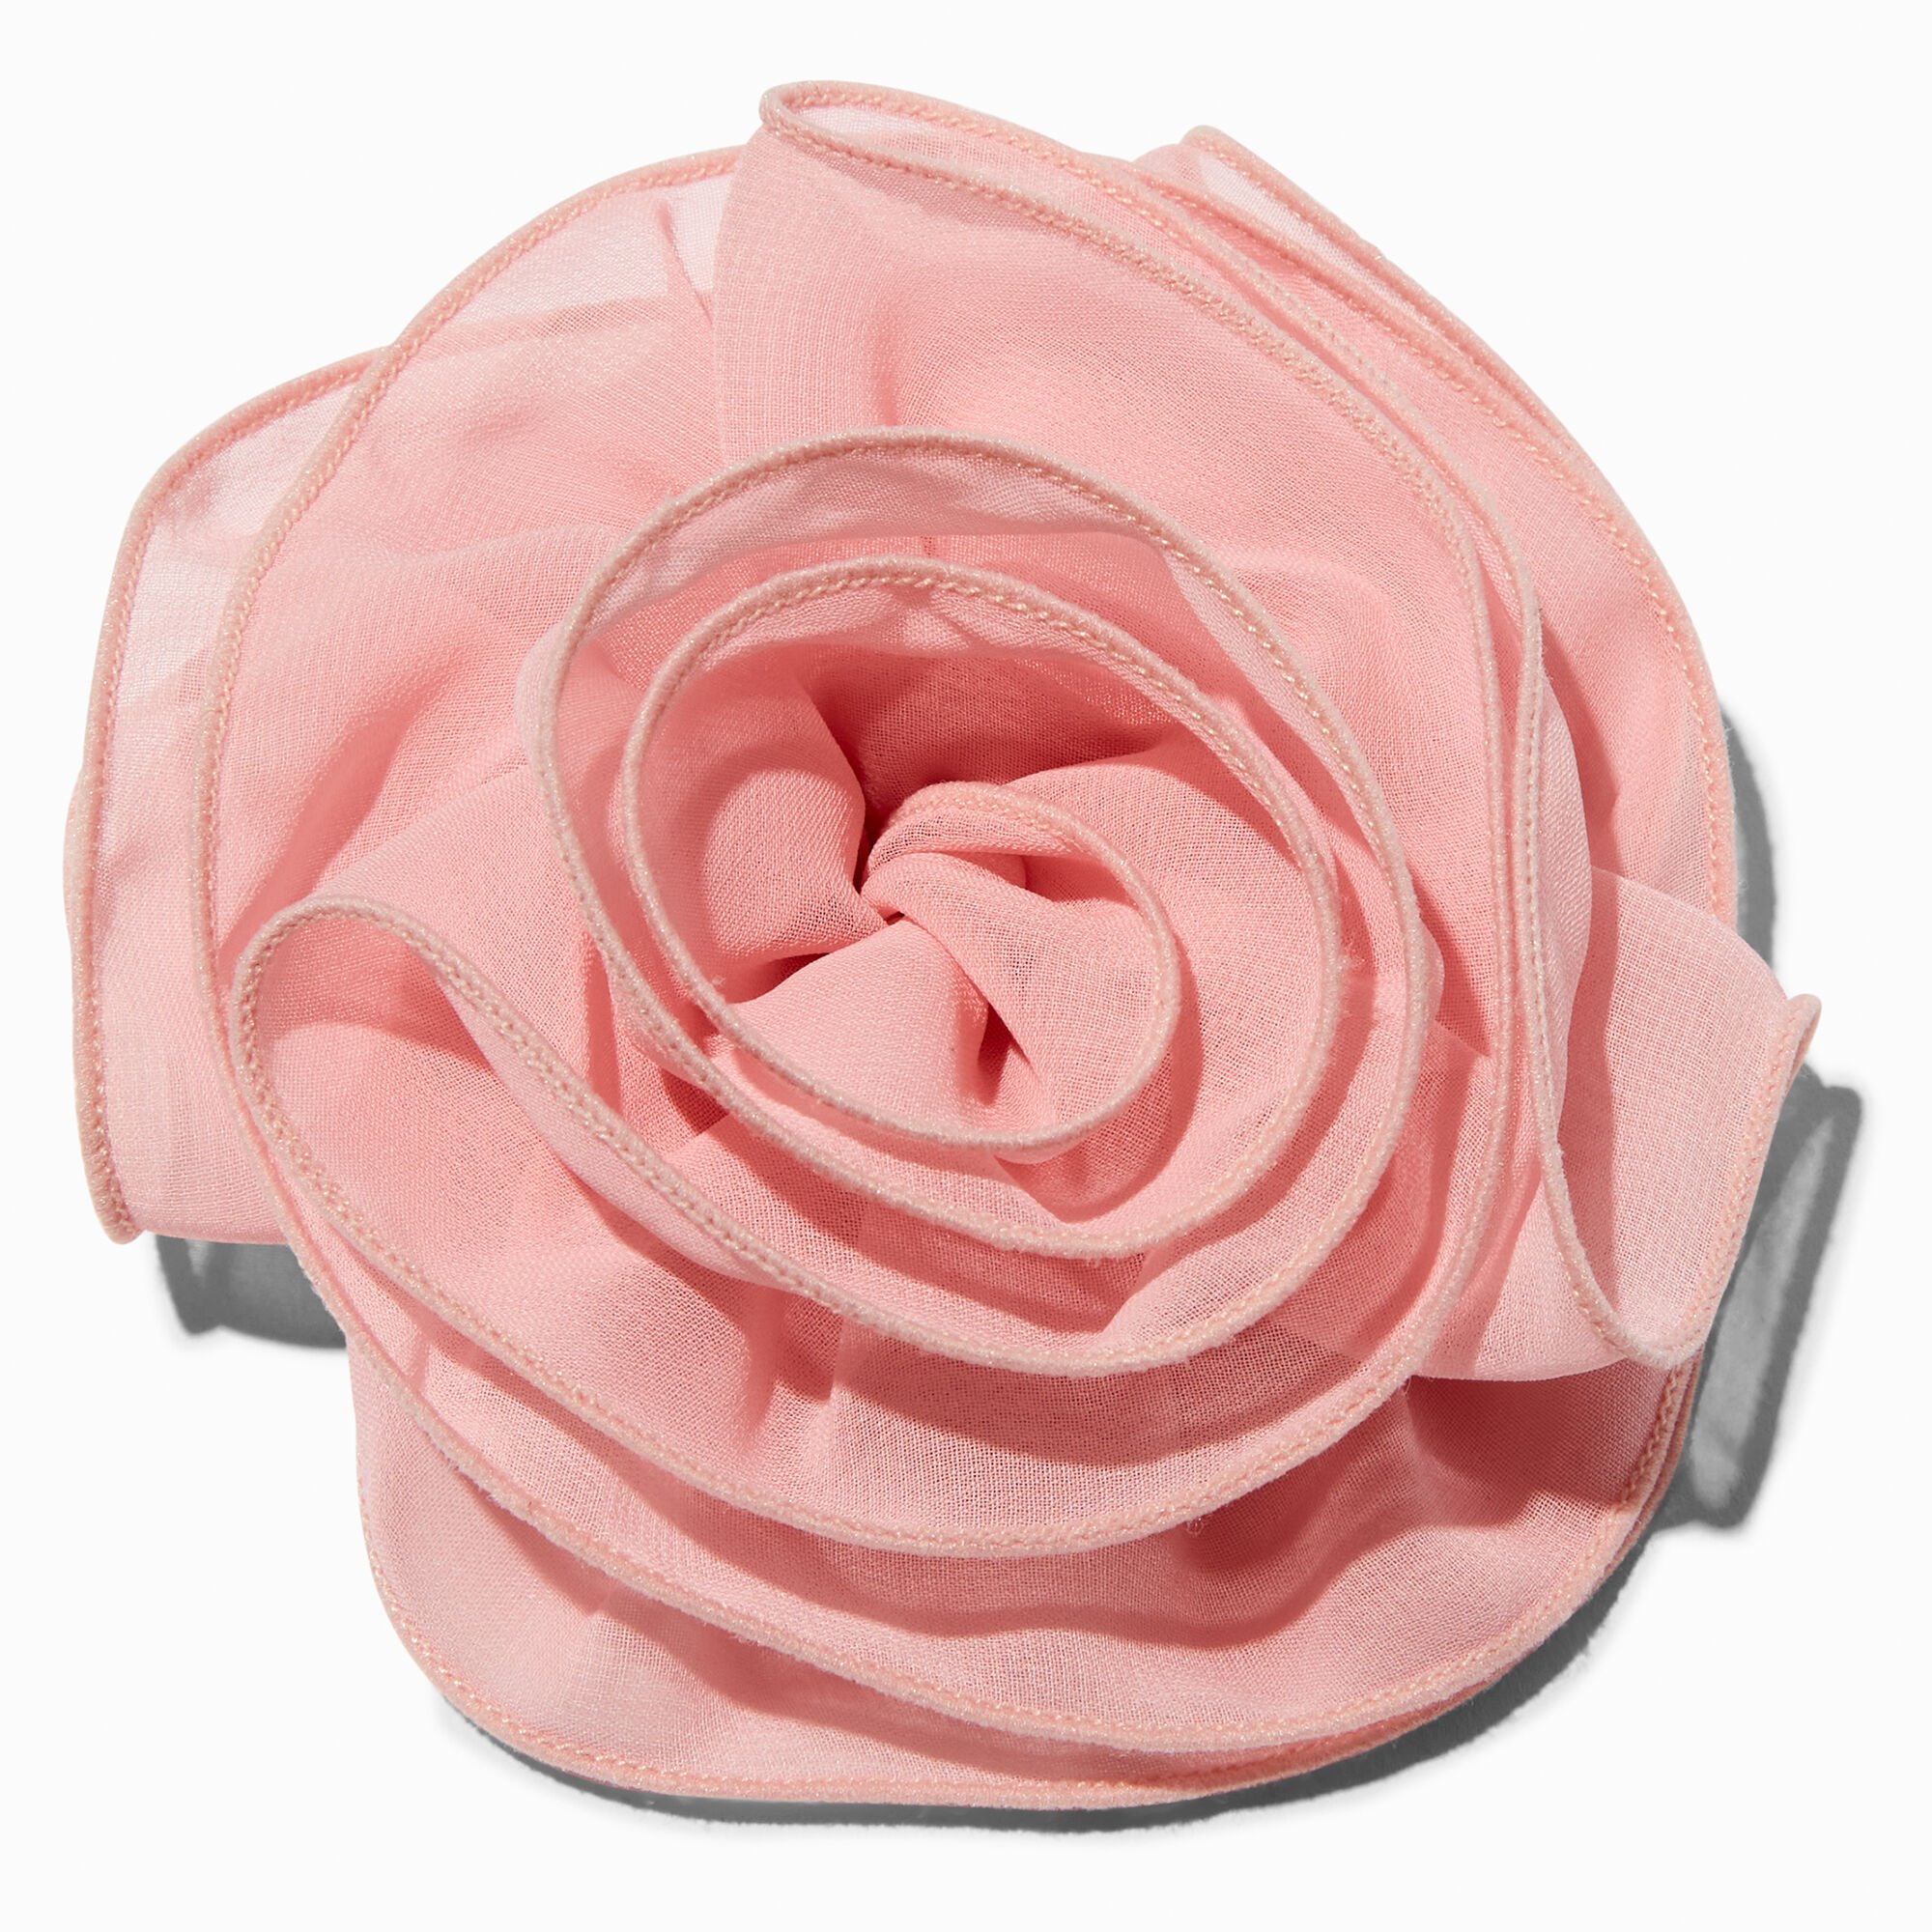 View Claires Blush Rosette Large Flower Hair Clip Pink information